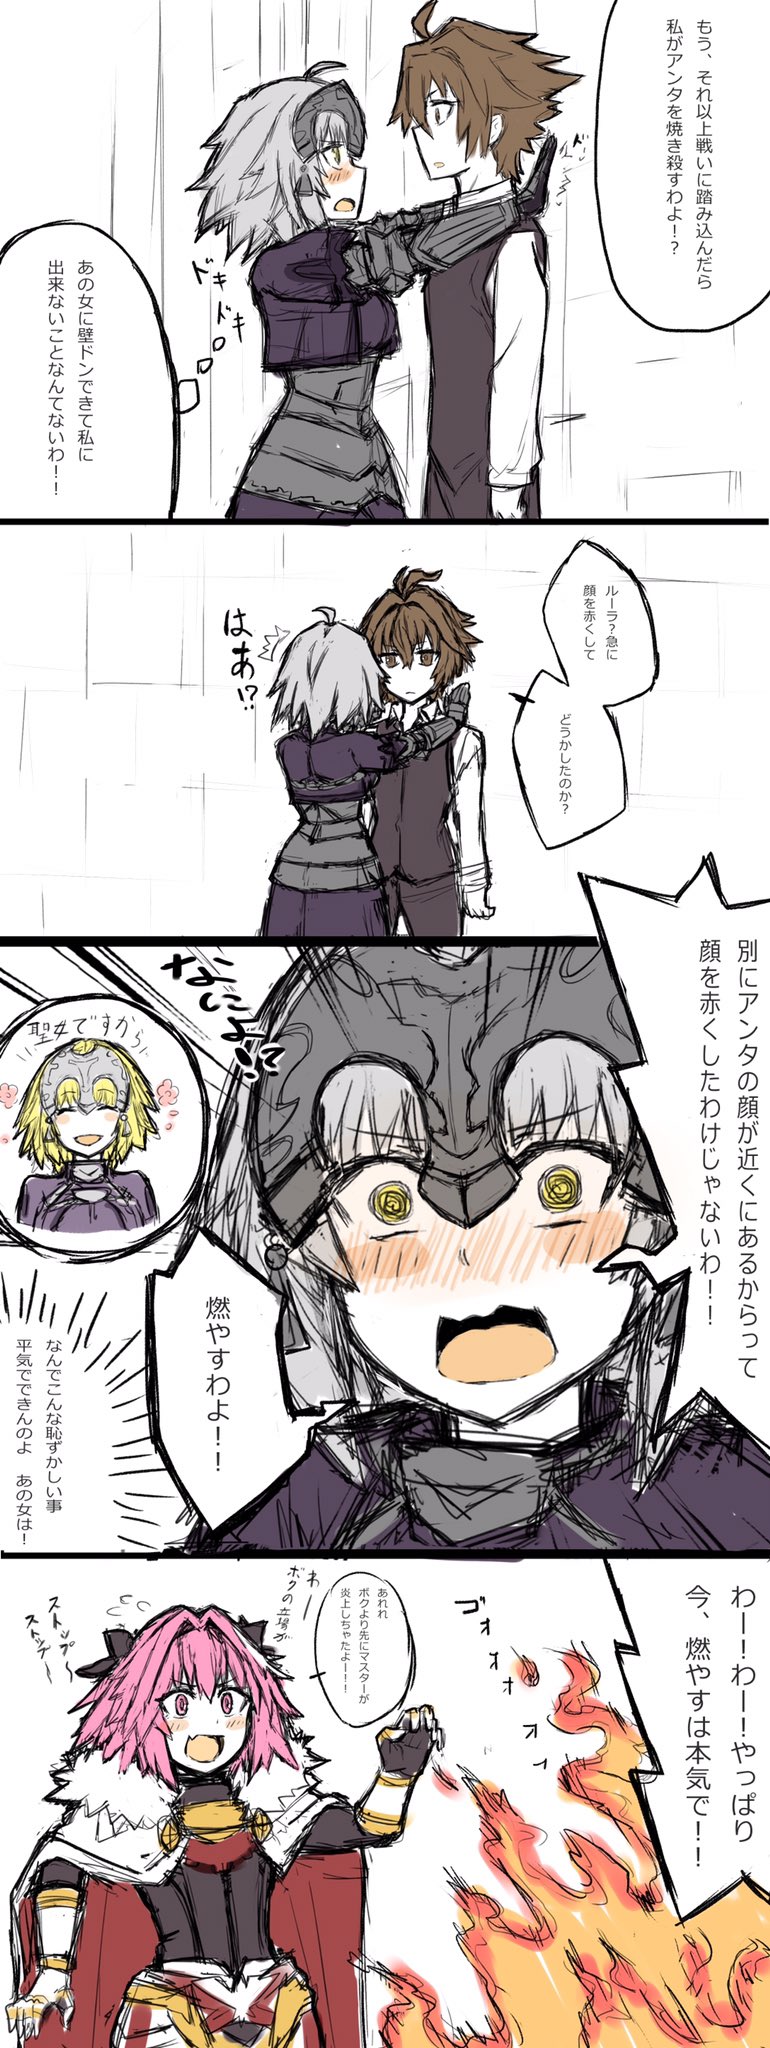 2boys 2girls 4koma :3 ahoge armor armored_dress bangs black_pants black_ribbon blonde_hair blush brown_hair cape capelet chains cloak closed_eyes comic commentary eyebrows_visible_through_hair face-to-face fate/apocrypha fate/grand_order fate_(series) fire from_side full-face_blush gauntlets hair_ornament hair_ribbon headpiece highres jeanne_alter long_sleeves looking_at_another multicolored_hair multiple_boys multiple_girls multiple_monochrome noyamanohana pale_skin pants pink_eyes pink_hair red_eyes ribbon rider_of_black ruler_(fate/apocrypha) shirt short_hair sieg_(fate/apocrypha) silver_hair speech_bubble translation_request trap turtleneck two-tone_hair violet_eyes waist_cape waistcoat white_shirt yellow_eyes